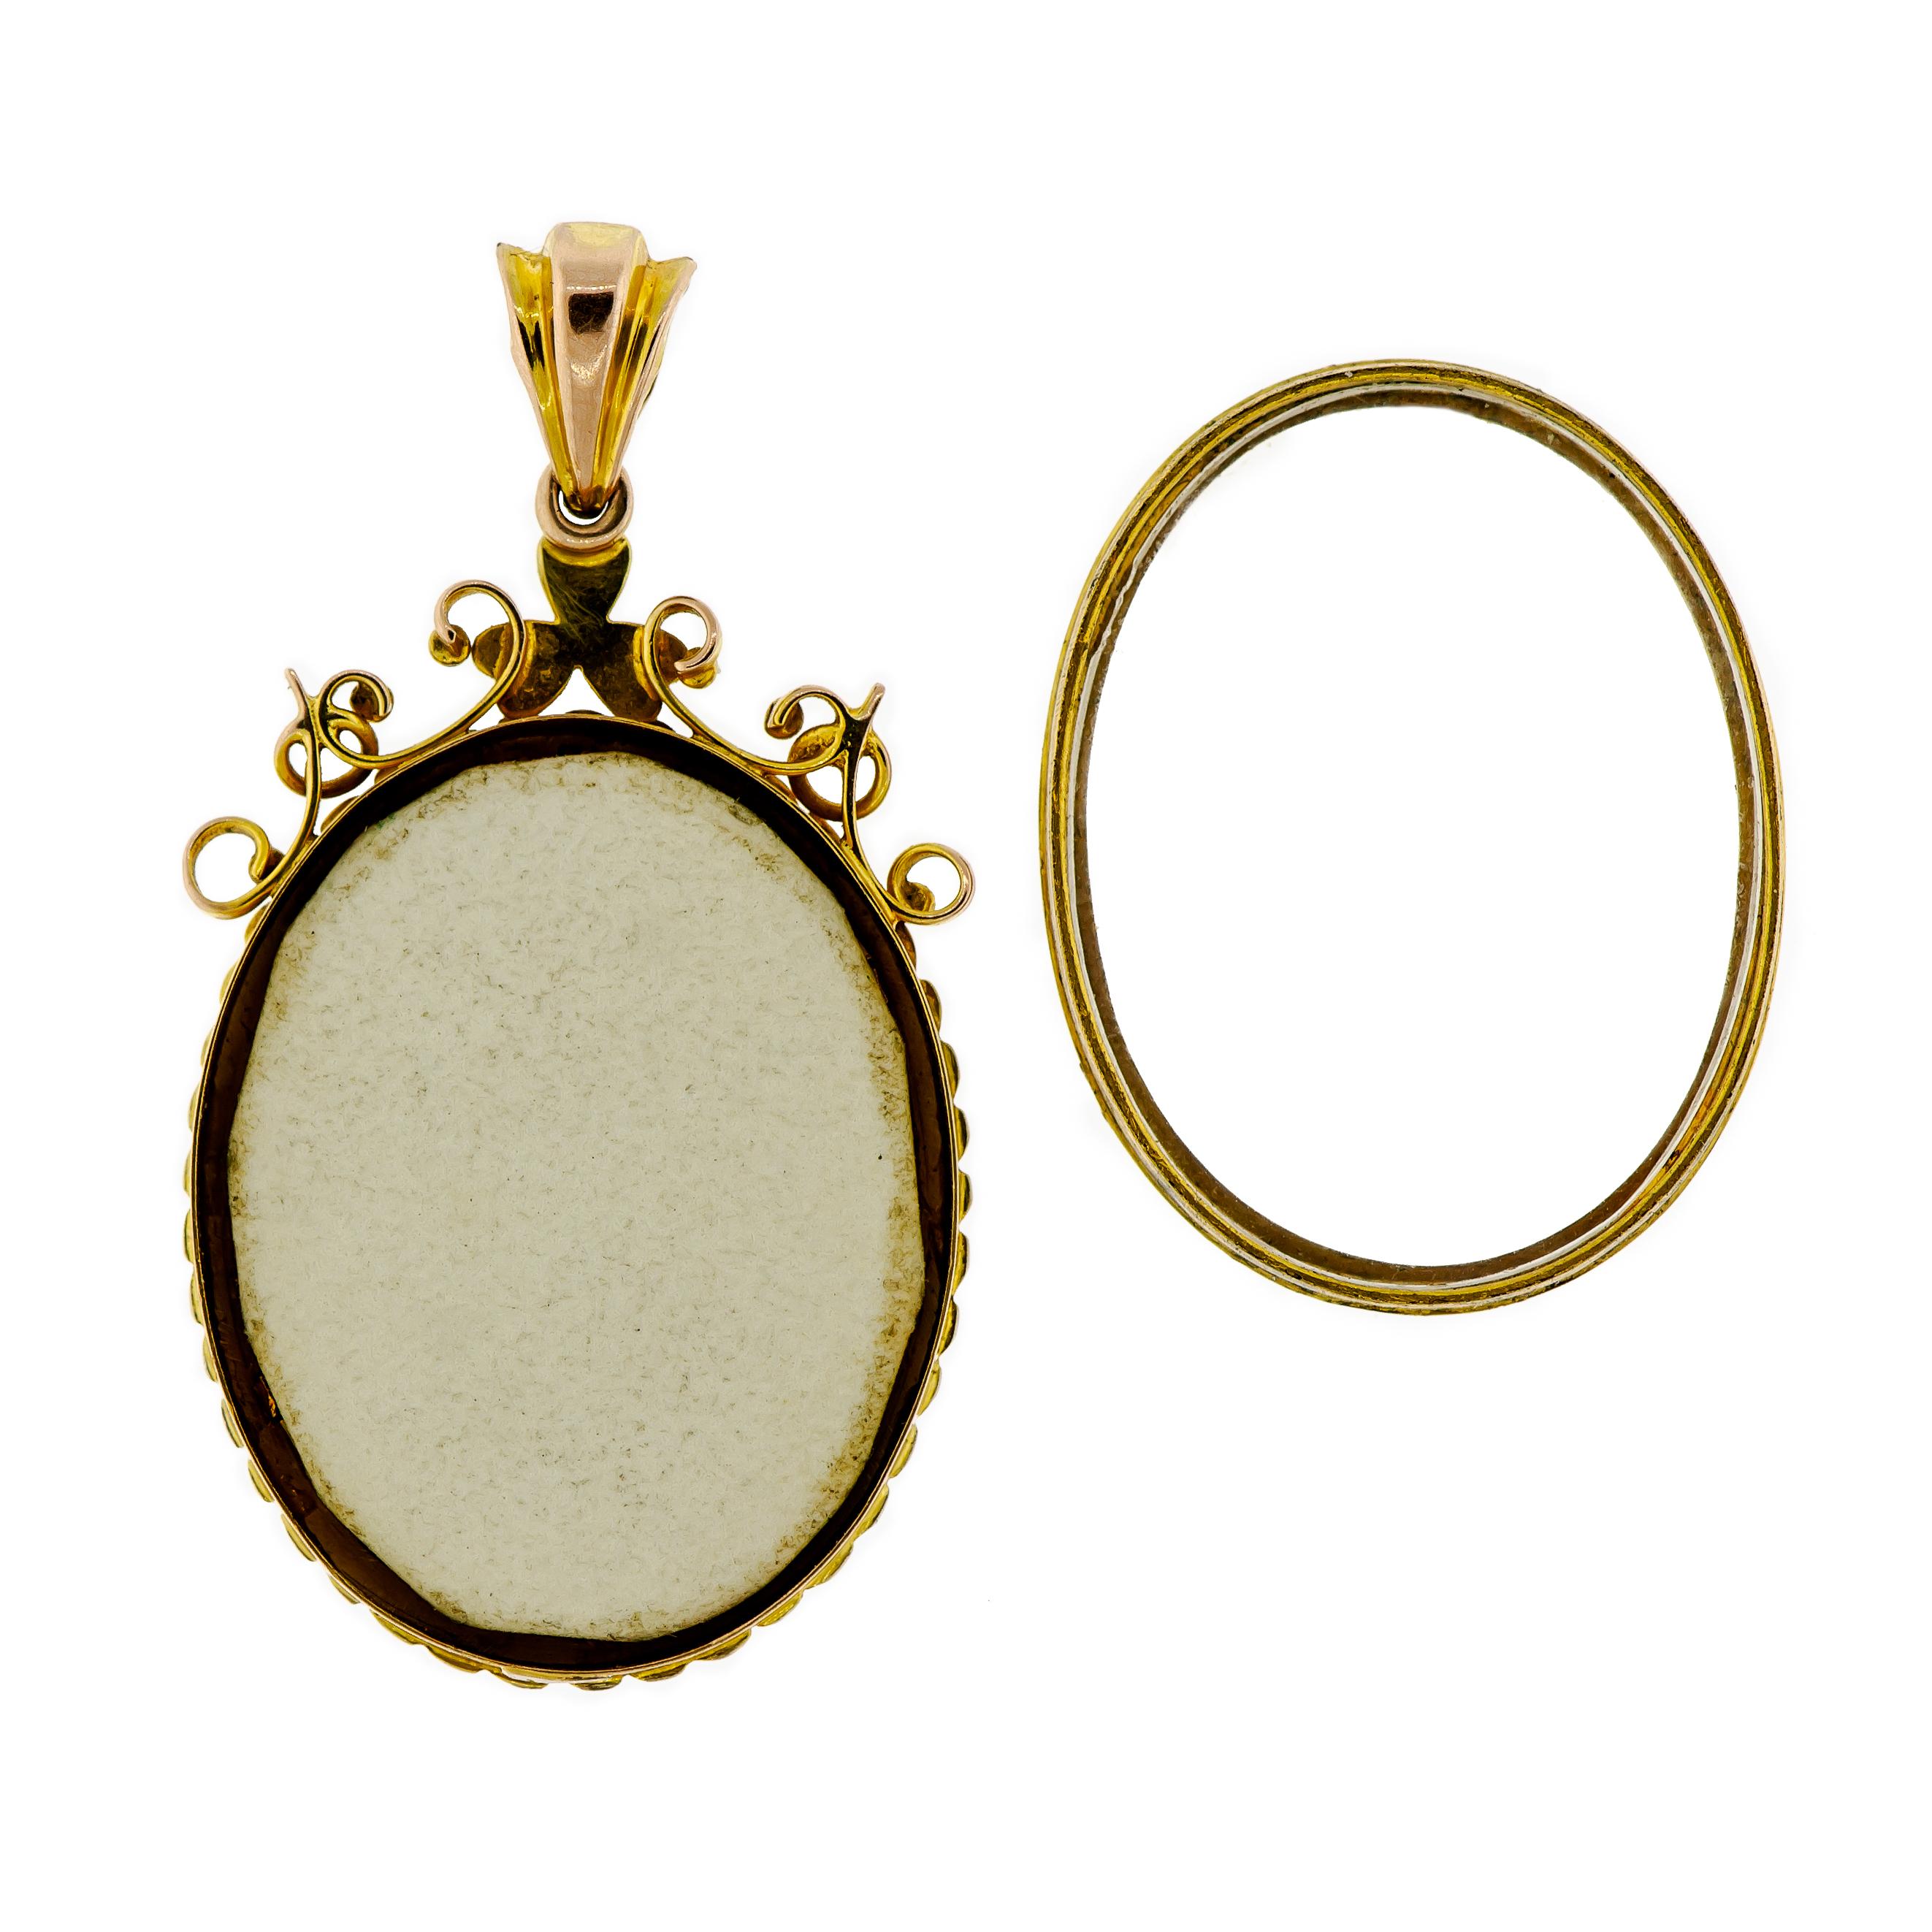 Turn-of-the-Century Antique Enamel and Pearl Miniature Locket In Excellent Condition For Sale In Lombard, IL